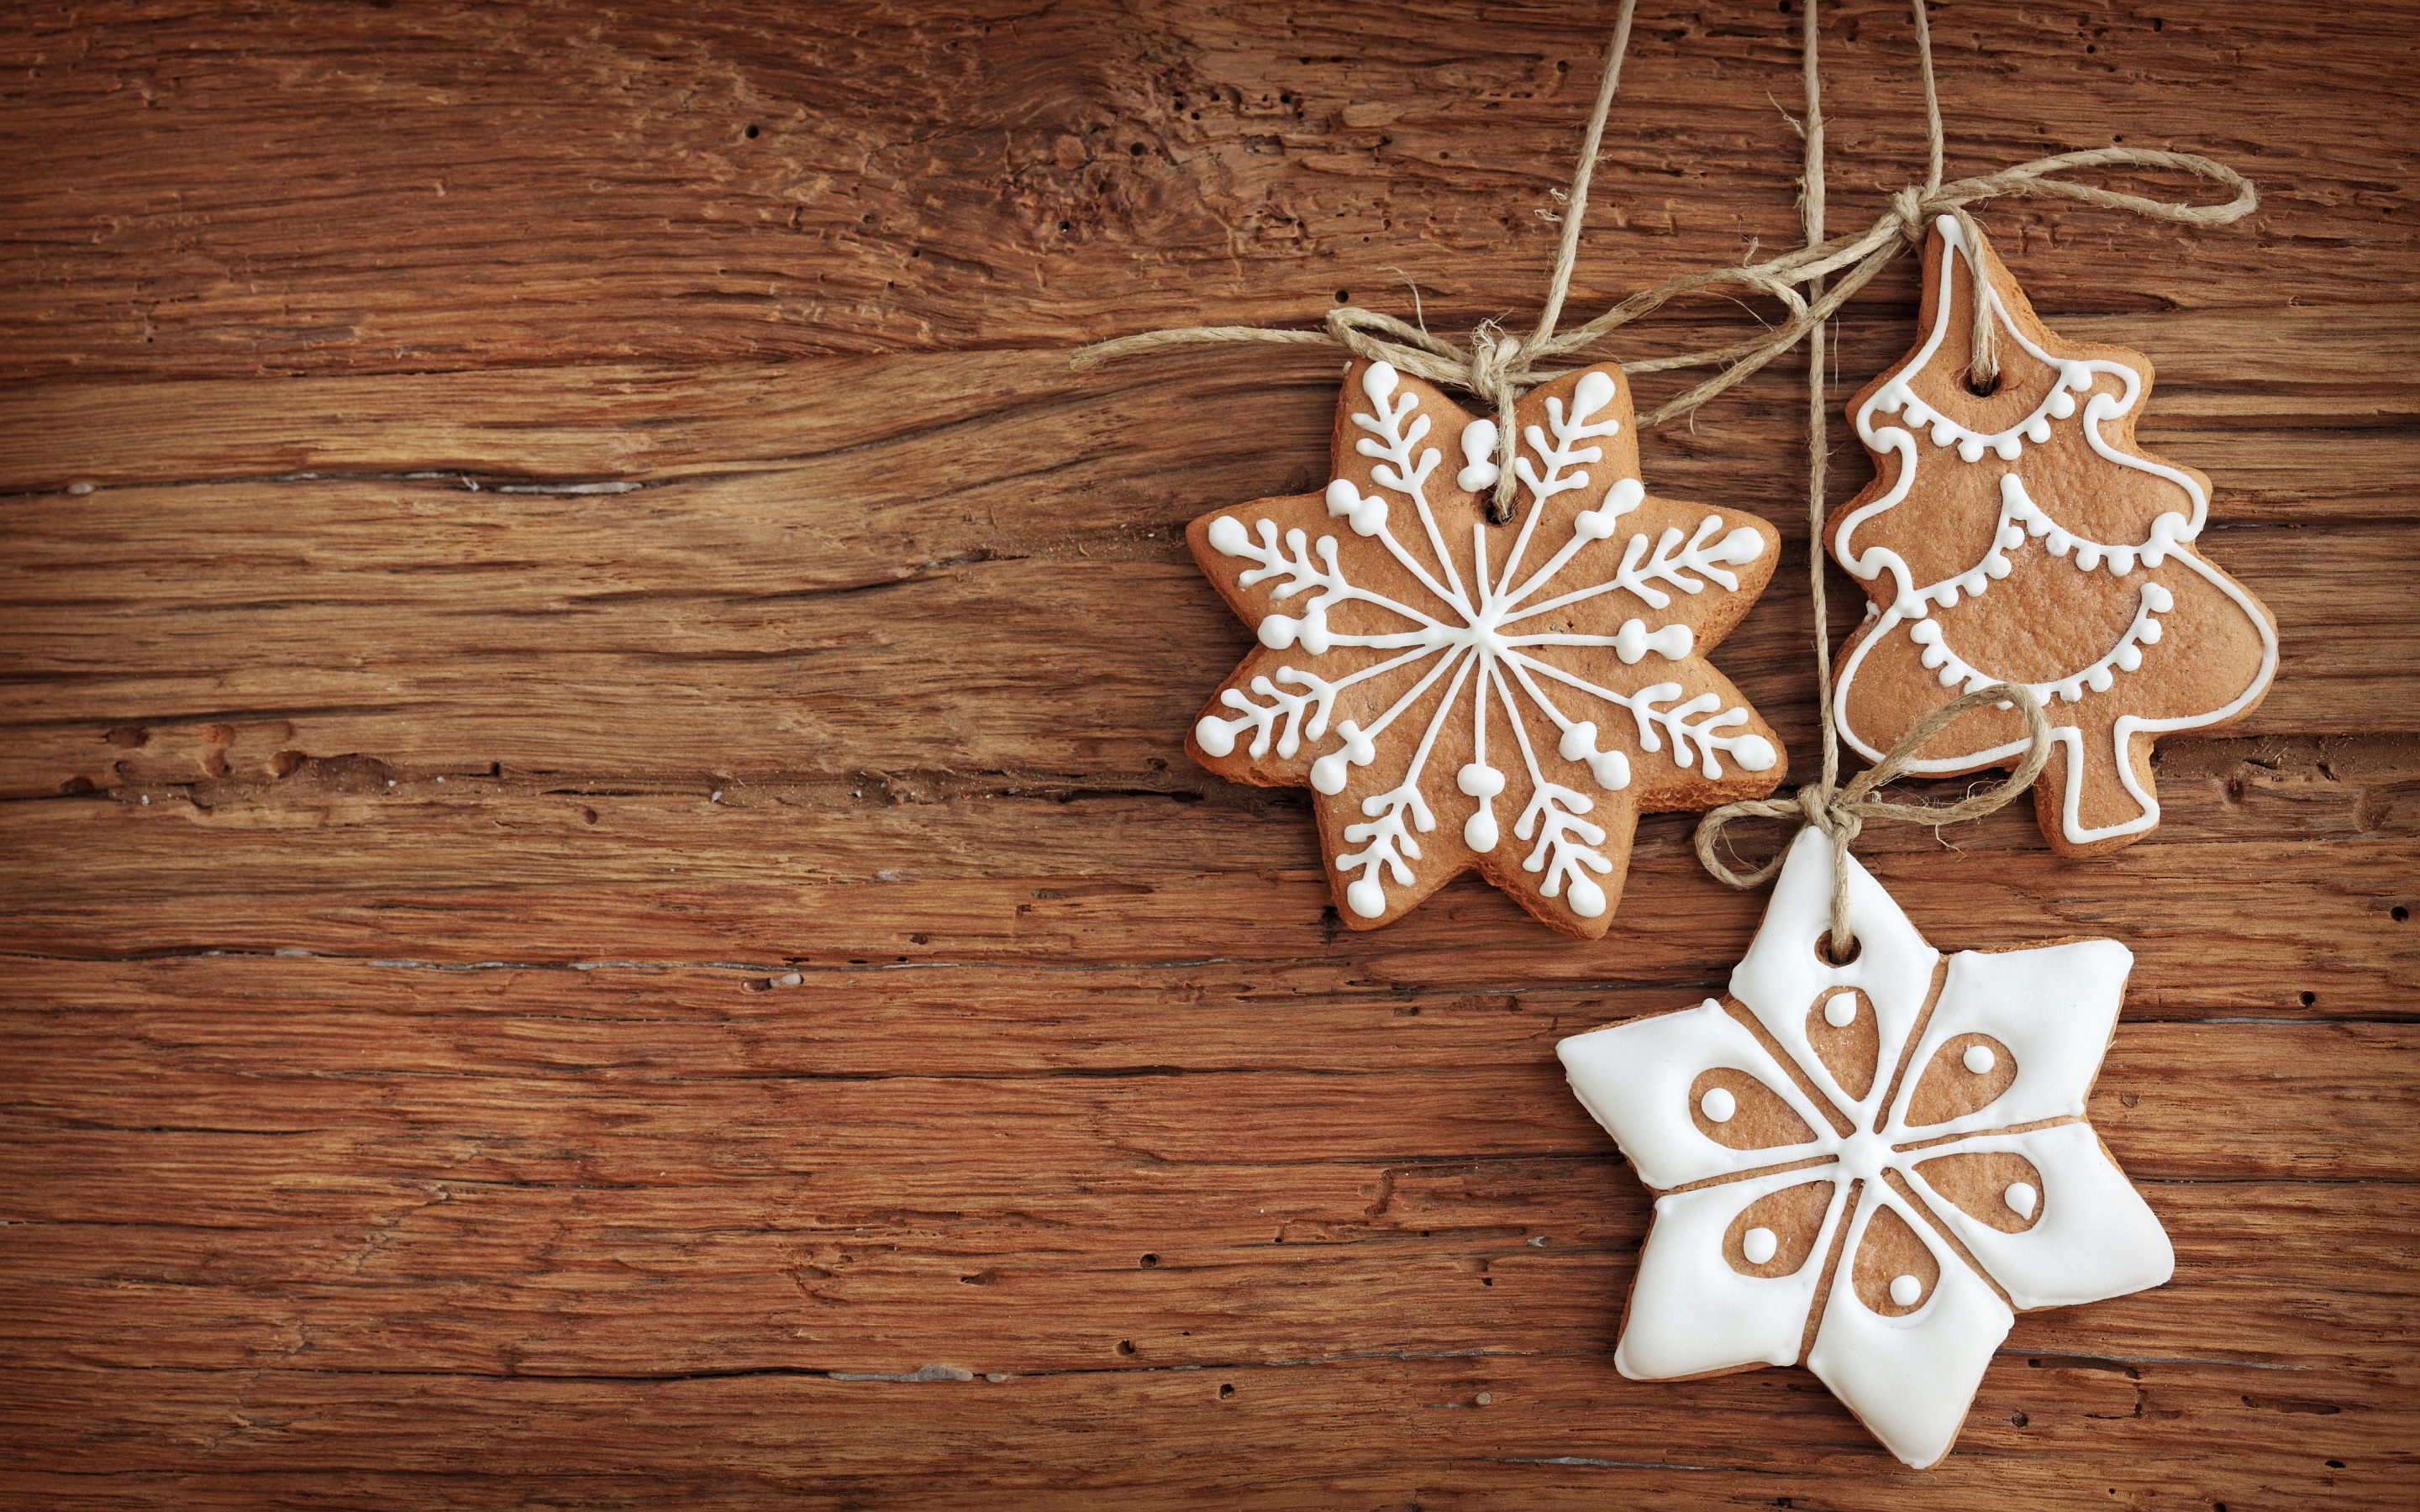 Free Christmas Cookies Background wallpaper | 2880x1800 | #24484